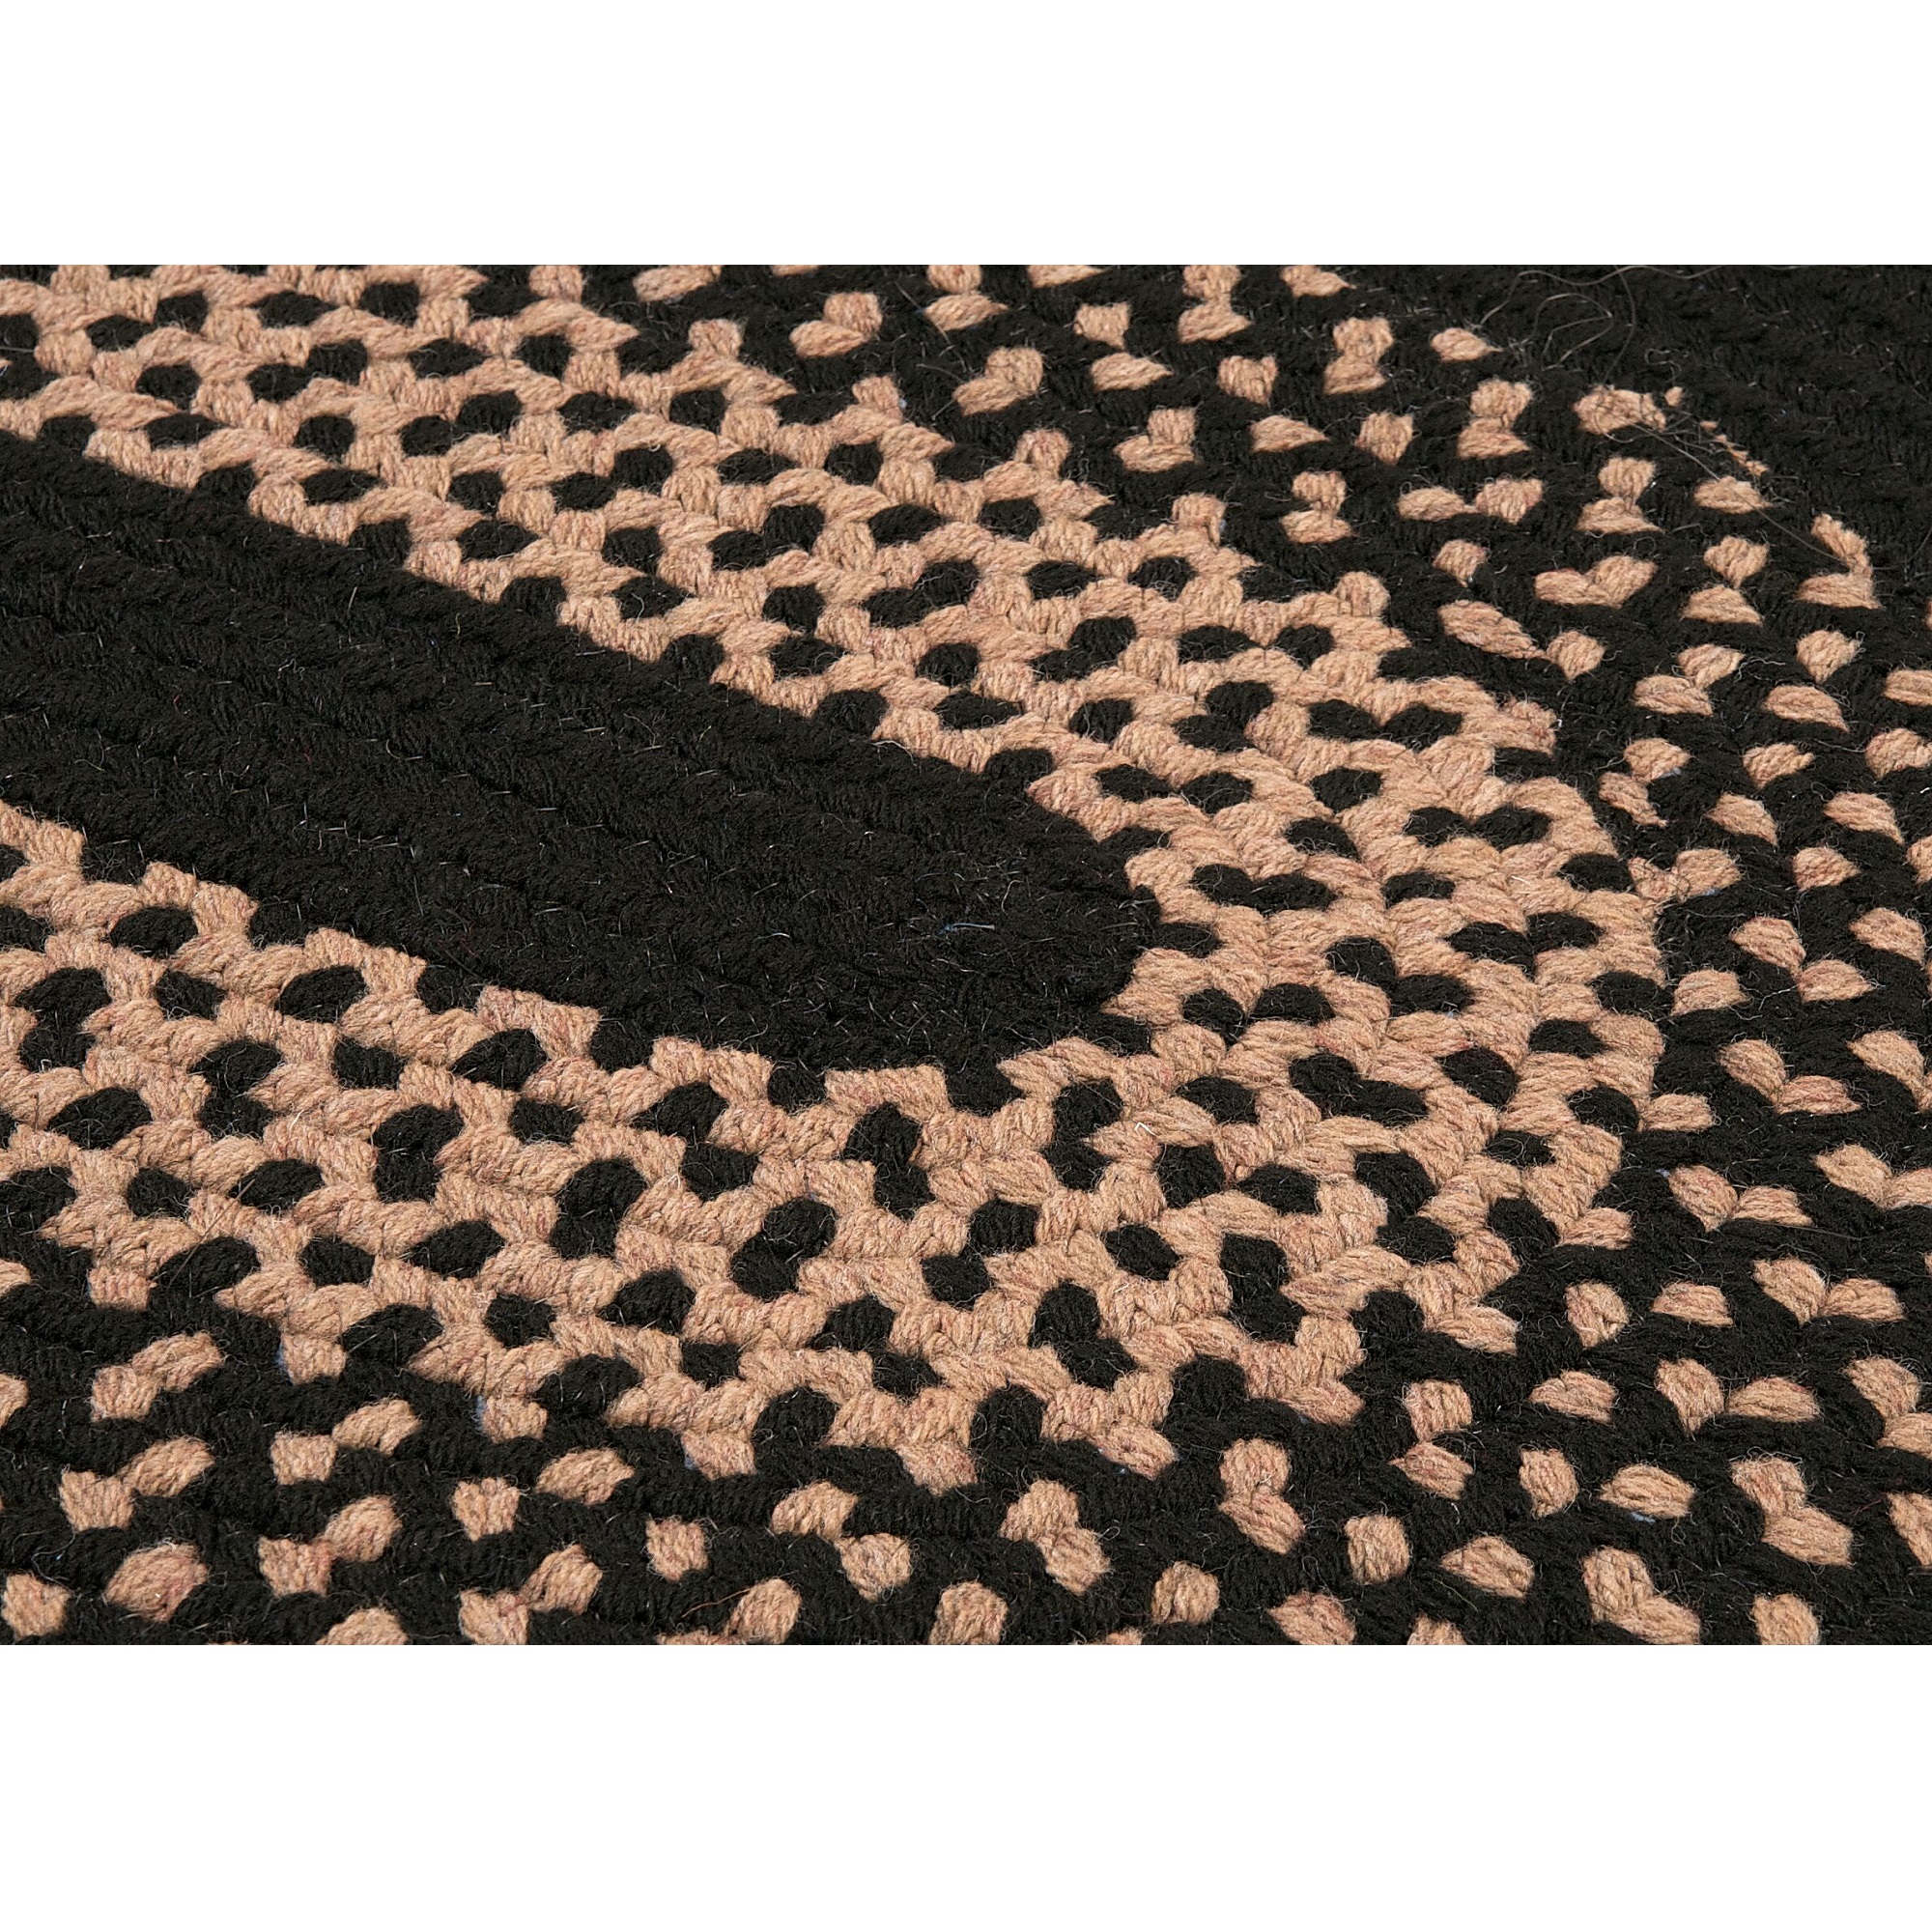 Colonial Mills 10' Black and Beige Braided Round Area Throw Rug